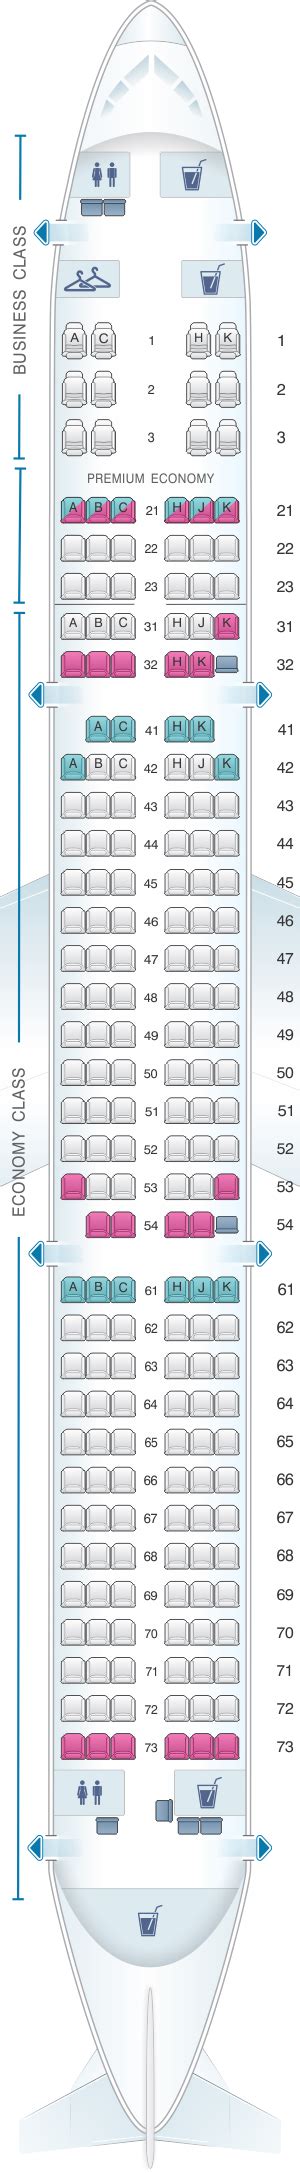 Seat Map And Seating Chart Airbus A Eva Air Fleet Seating Porn